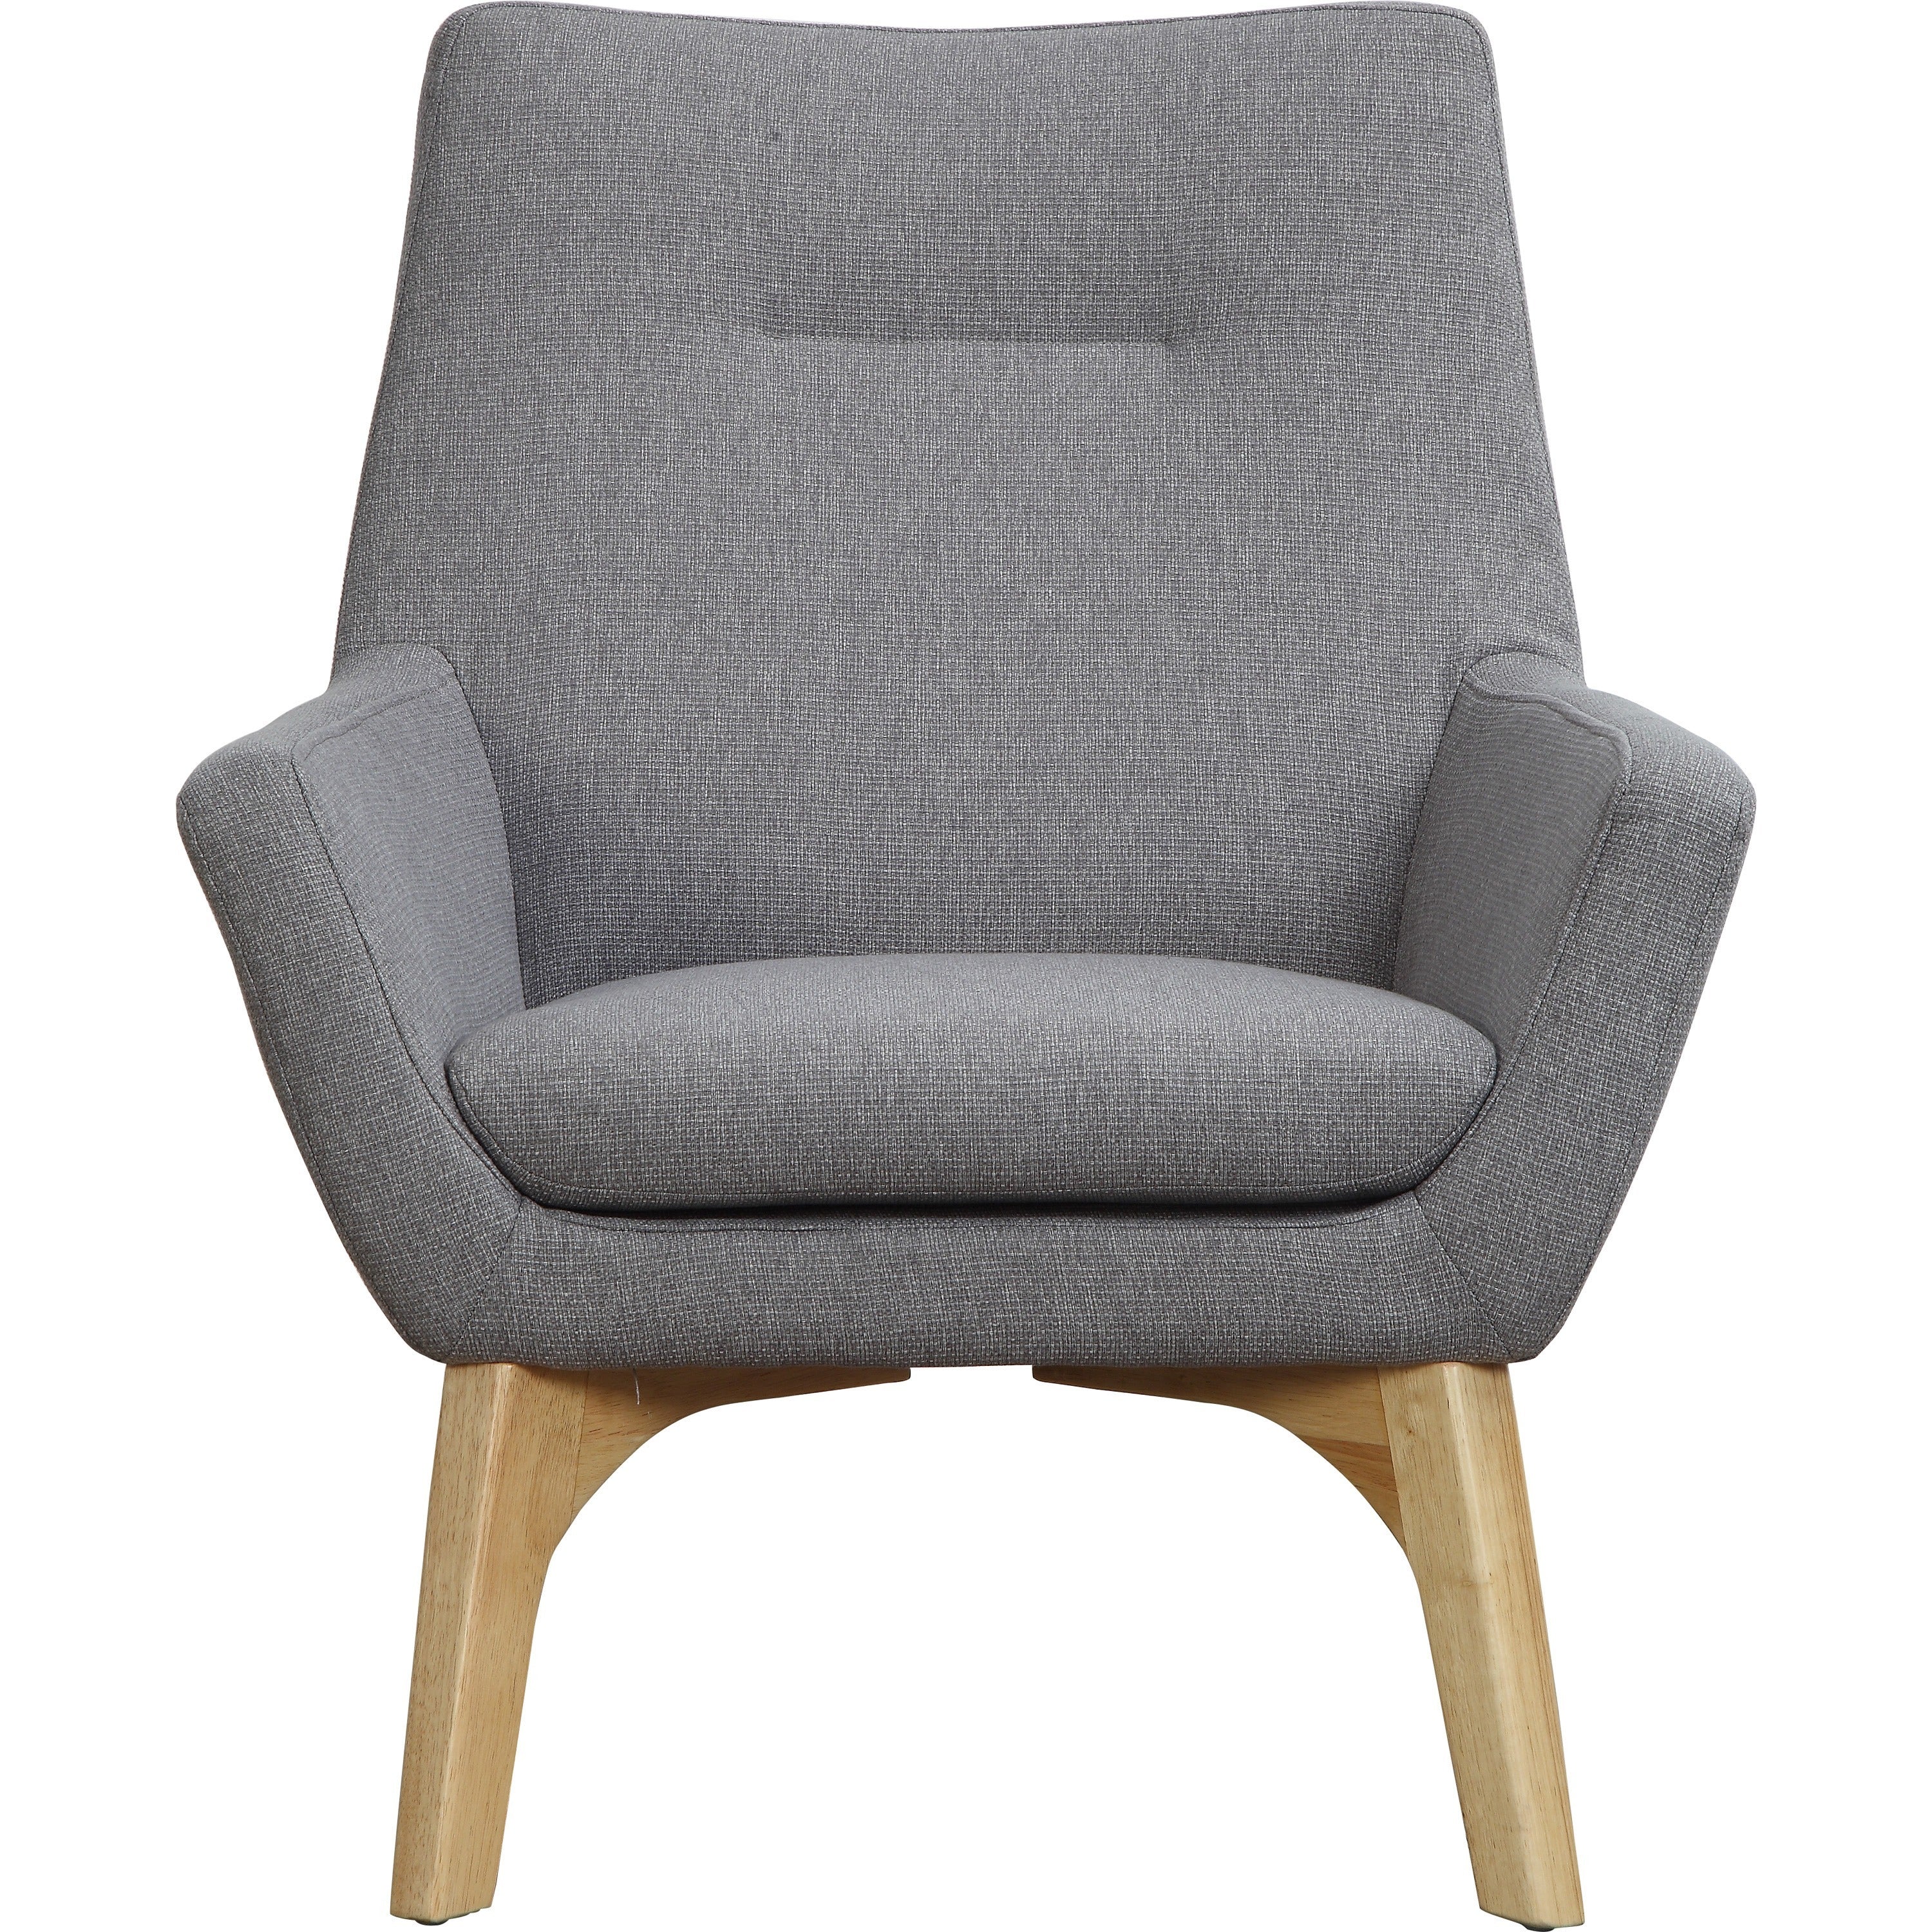 lorell-quintessence-collection-upholstered-chair-gray-seat-gray-back-low-back-four-legged-base-1-each_llr68961 - 2